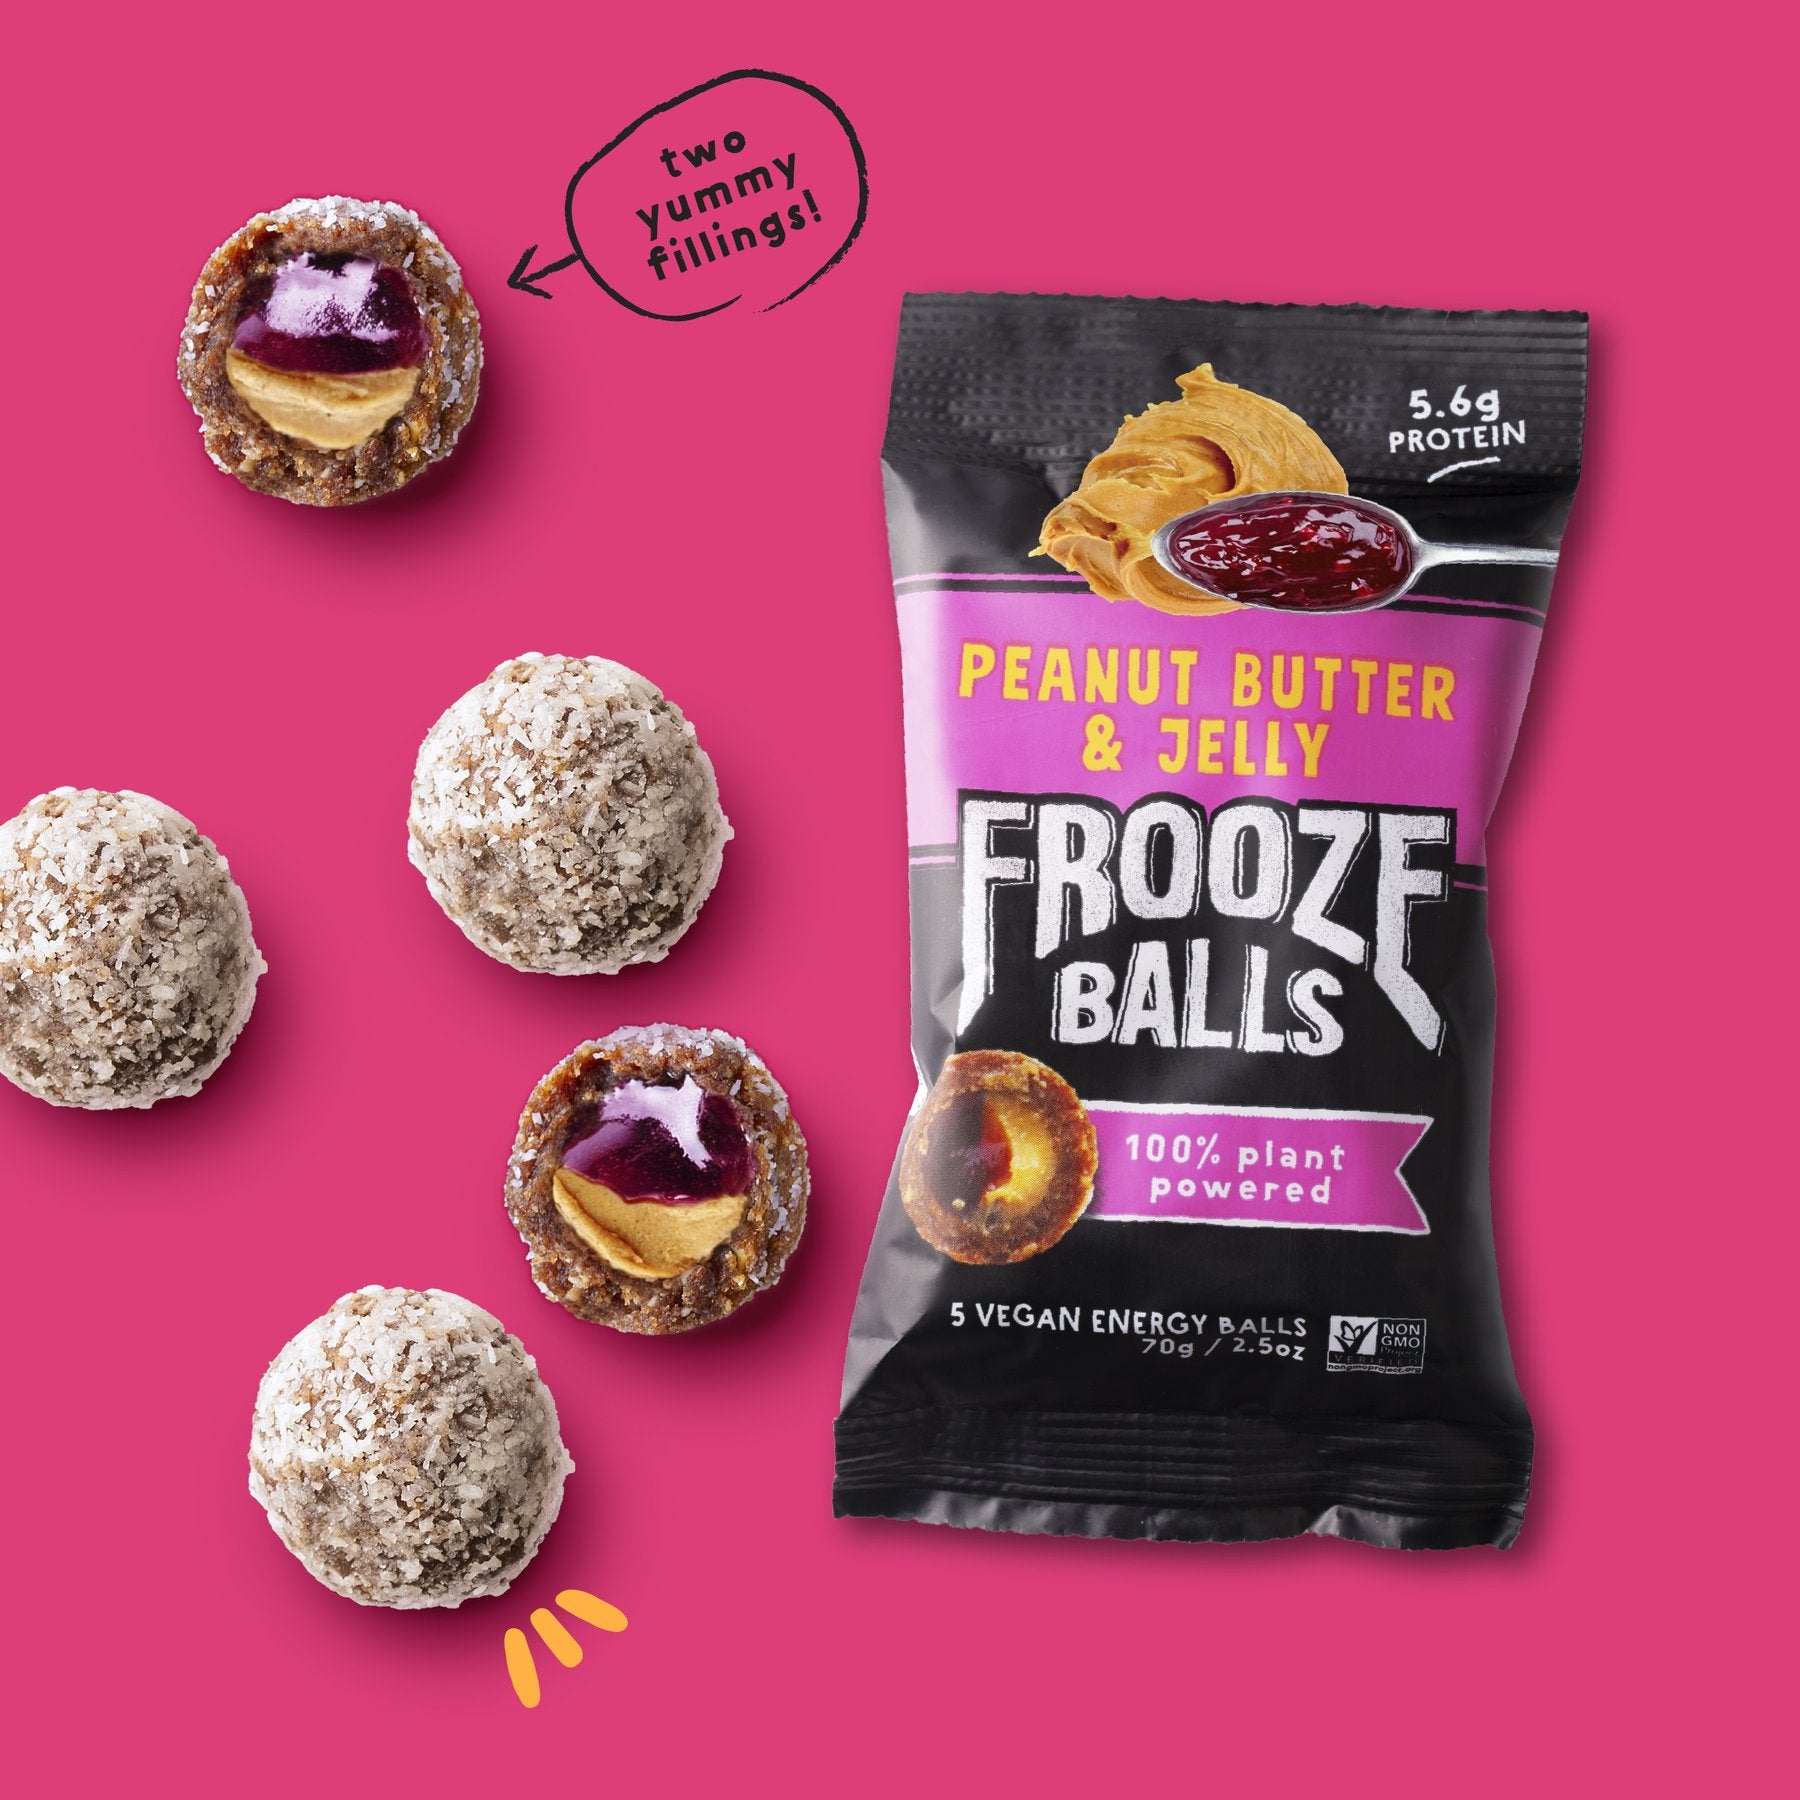 Peanut Butter & Jelly | Frooze Balls